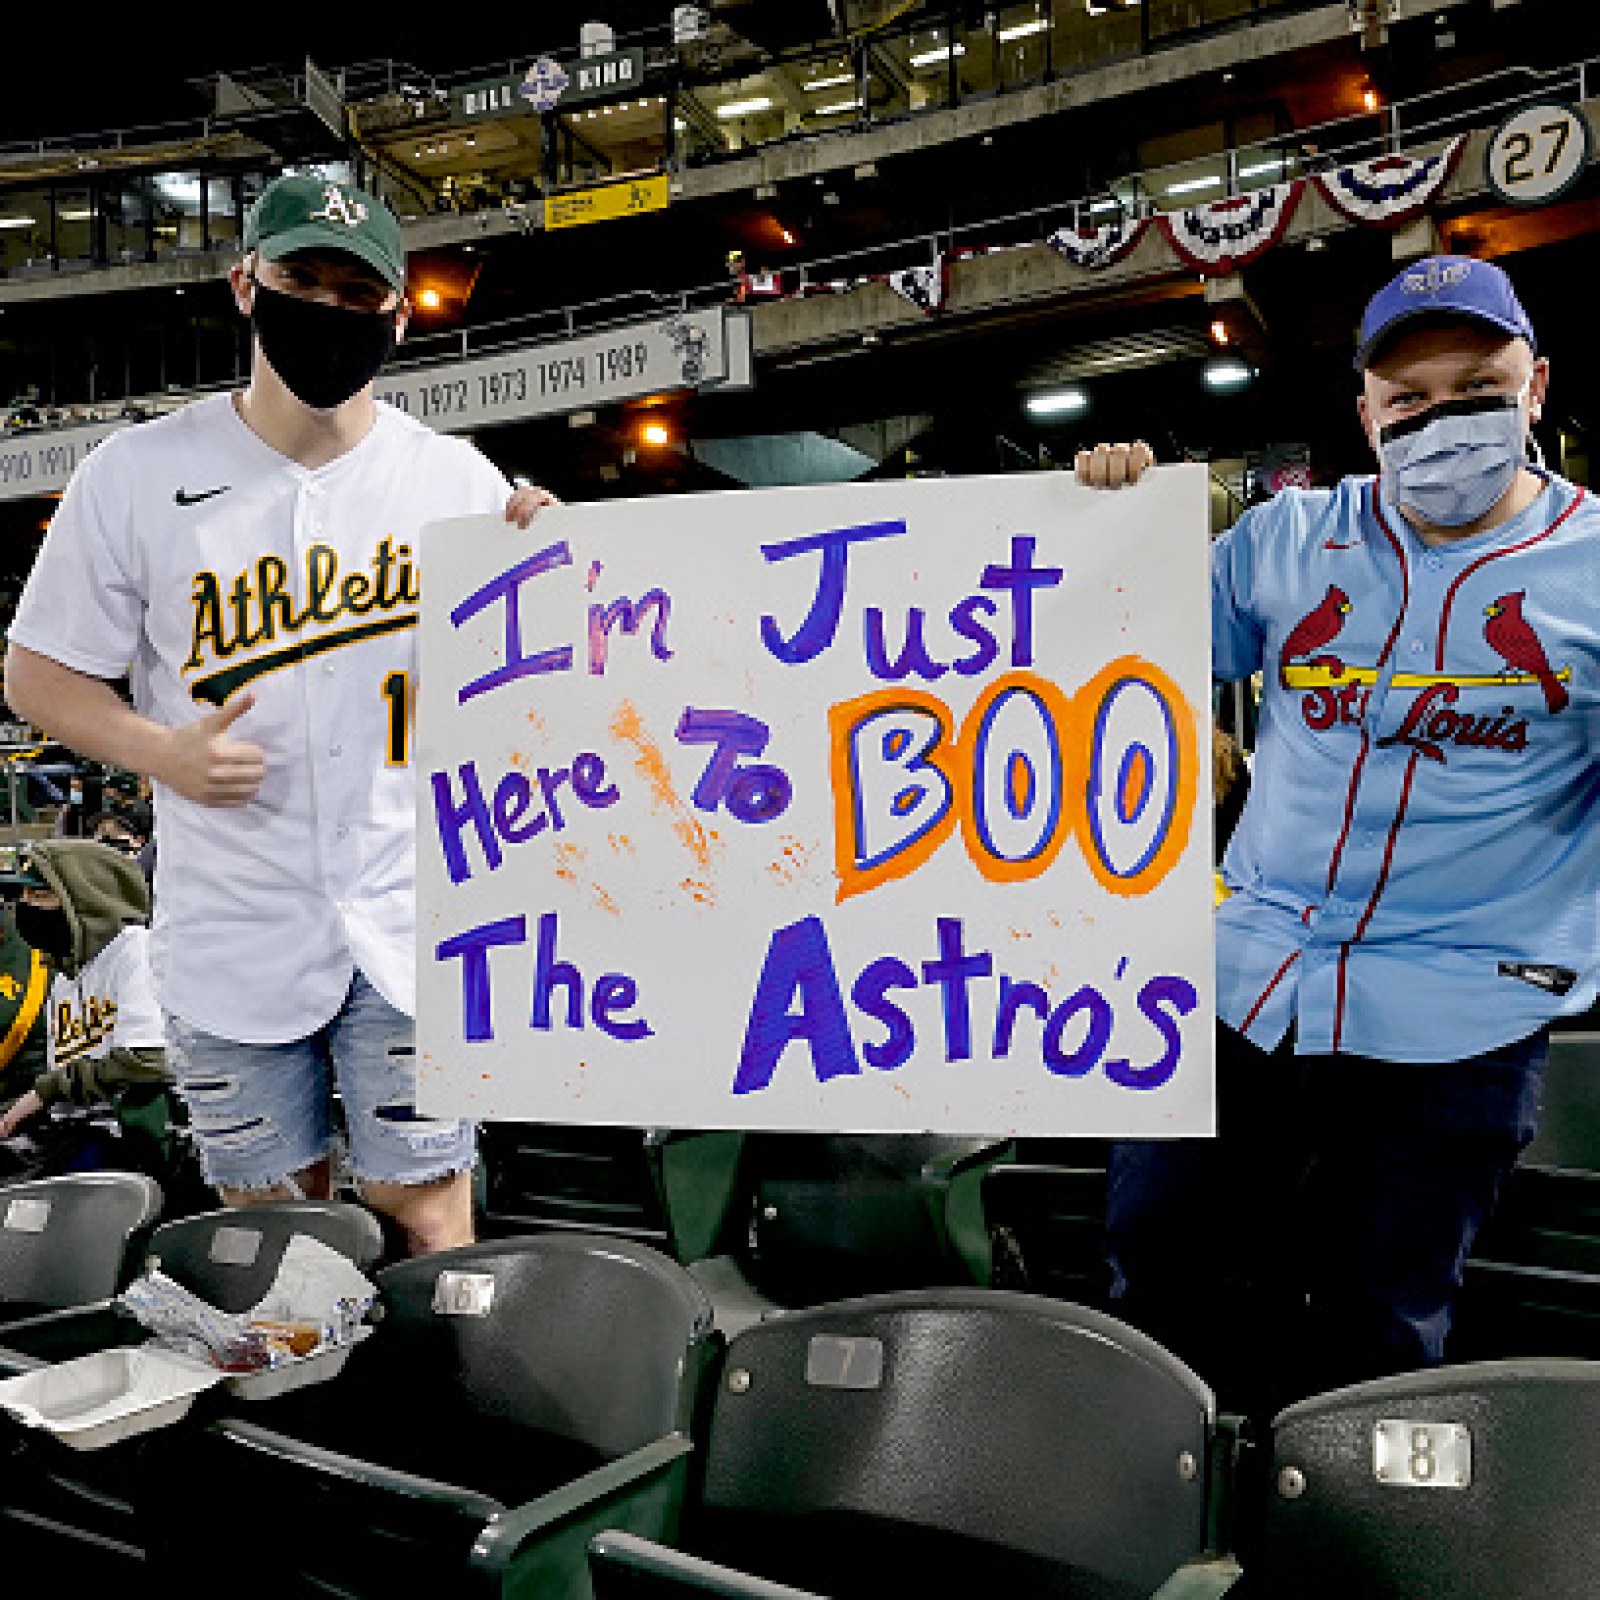 FUNNY Moments Of Houston Astros Getting BOOED! (Heckling & Taunting) 